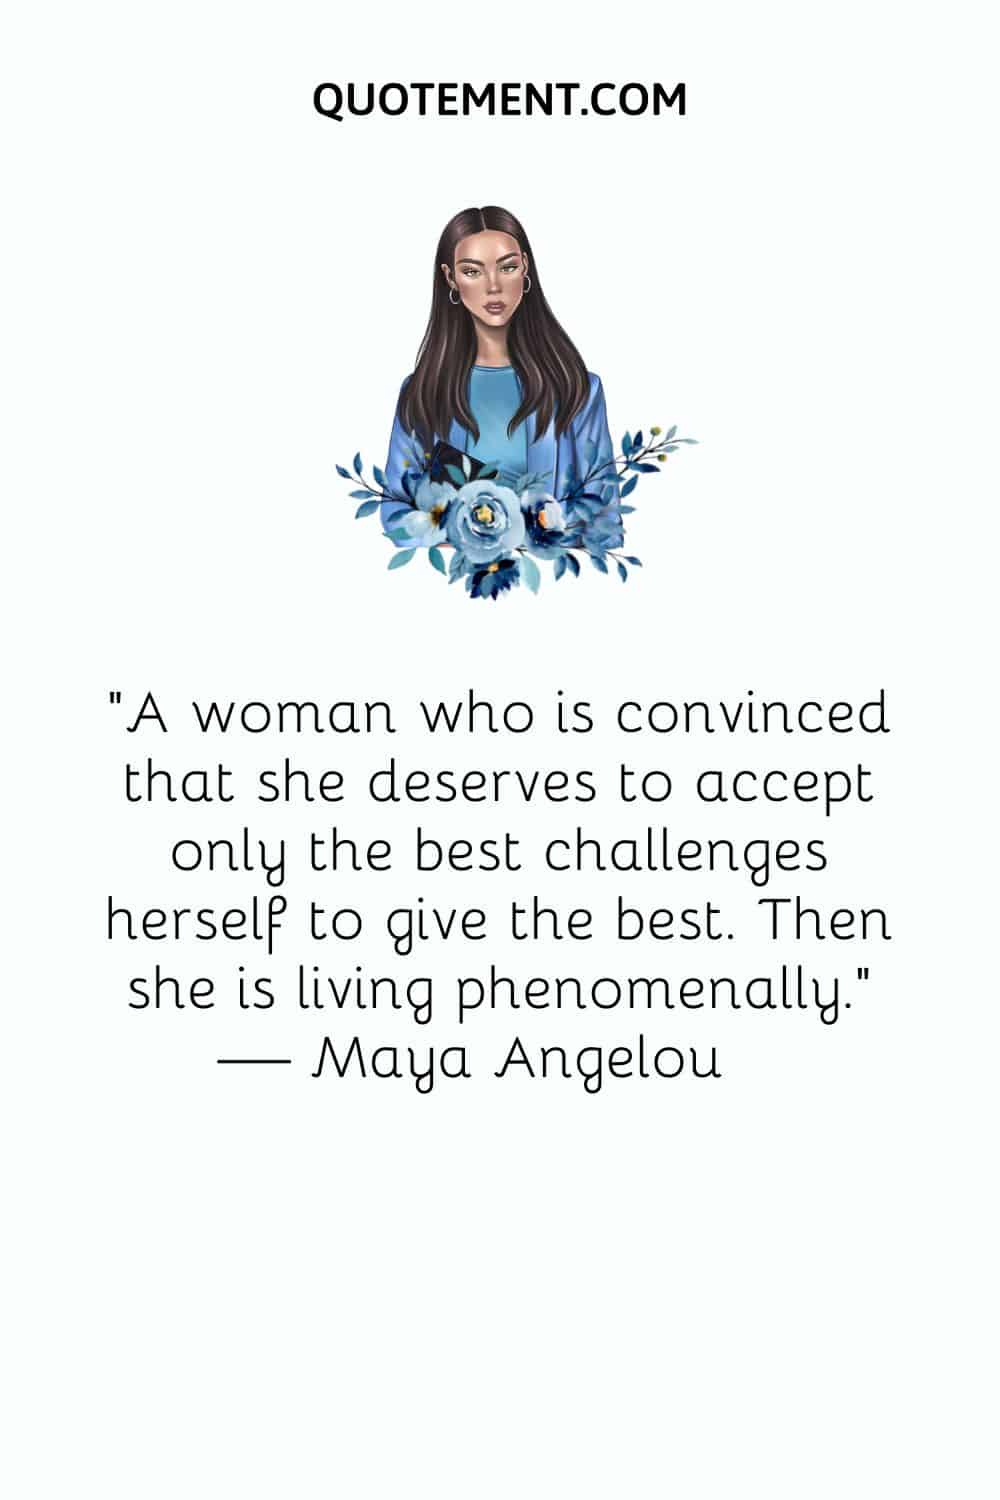 woman in blue illustration representing phenomenal woman quote